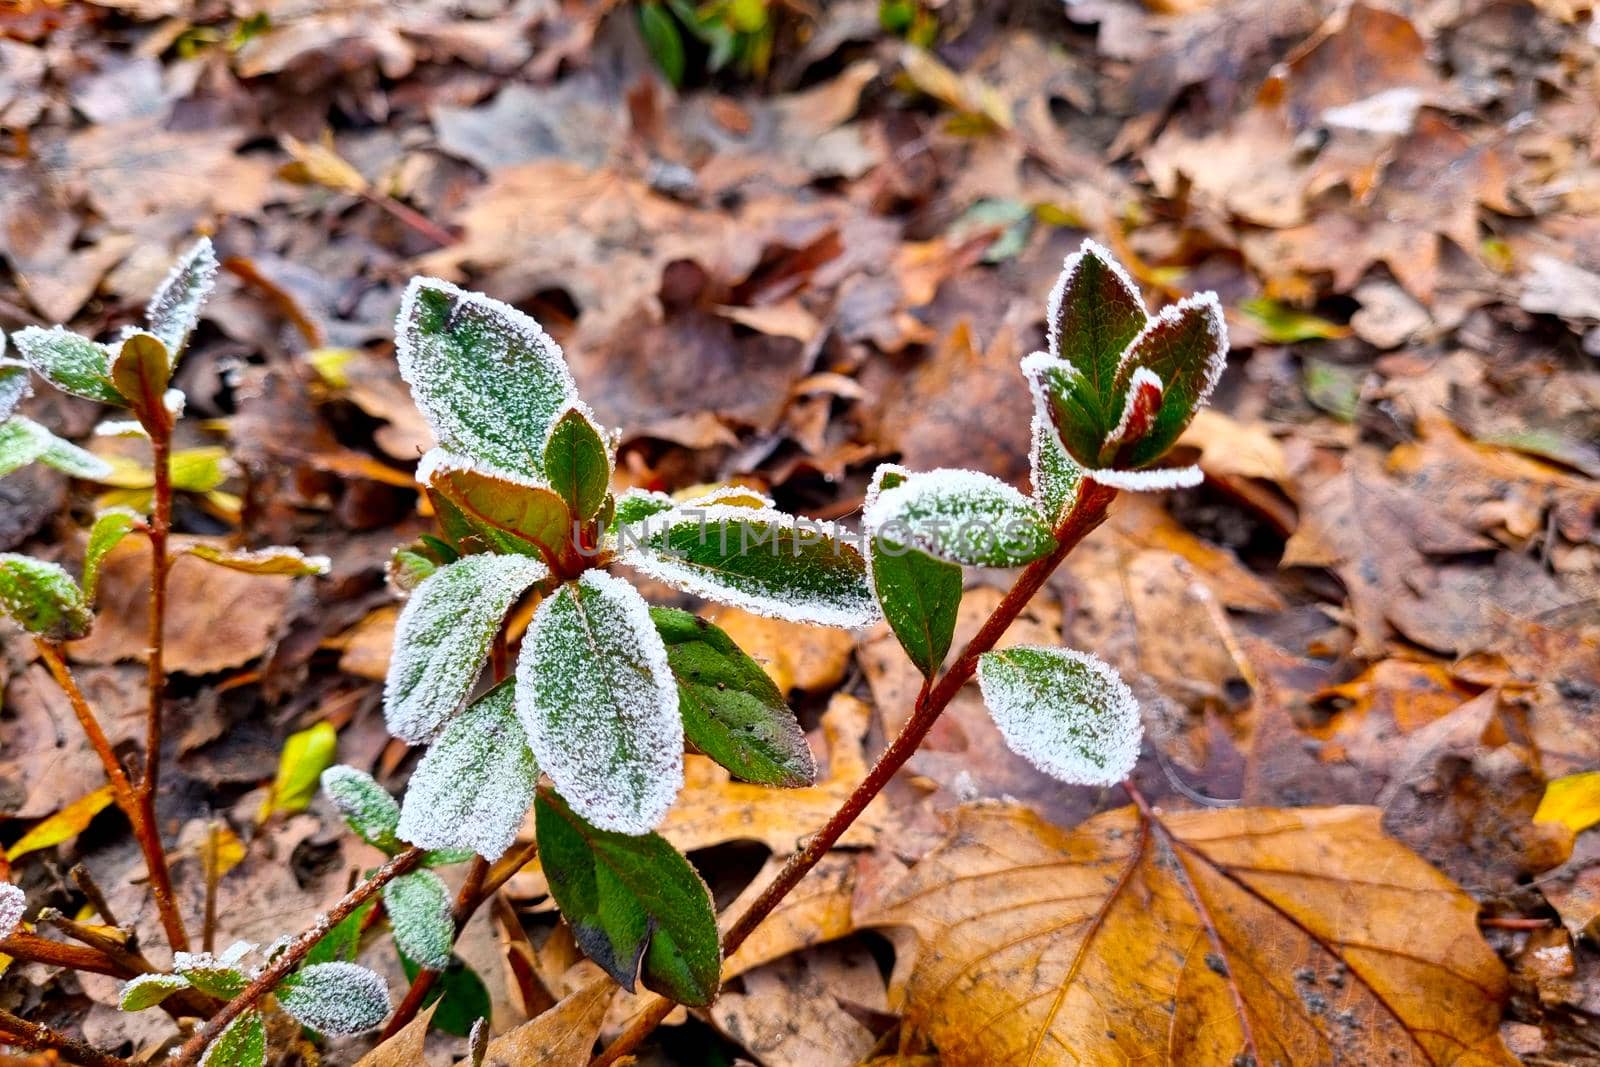 On the green leaves there is white frost, frost in the fall. The onset of cold weather